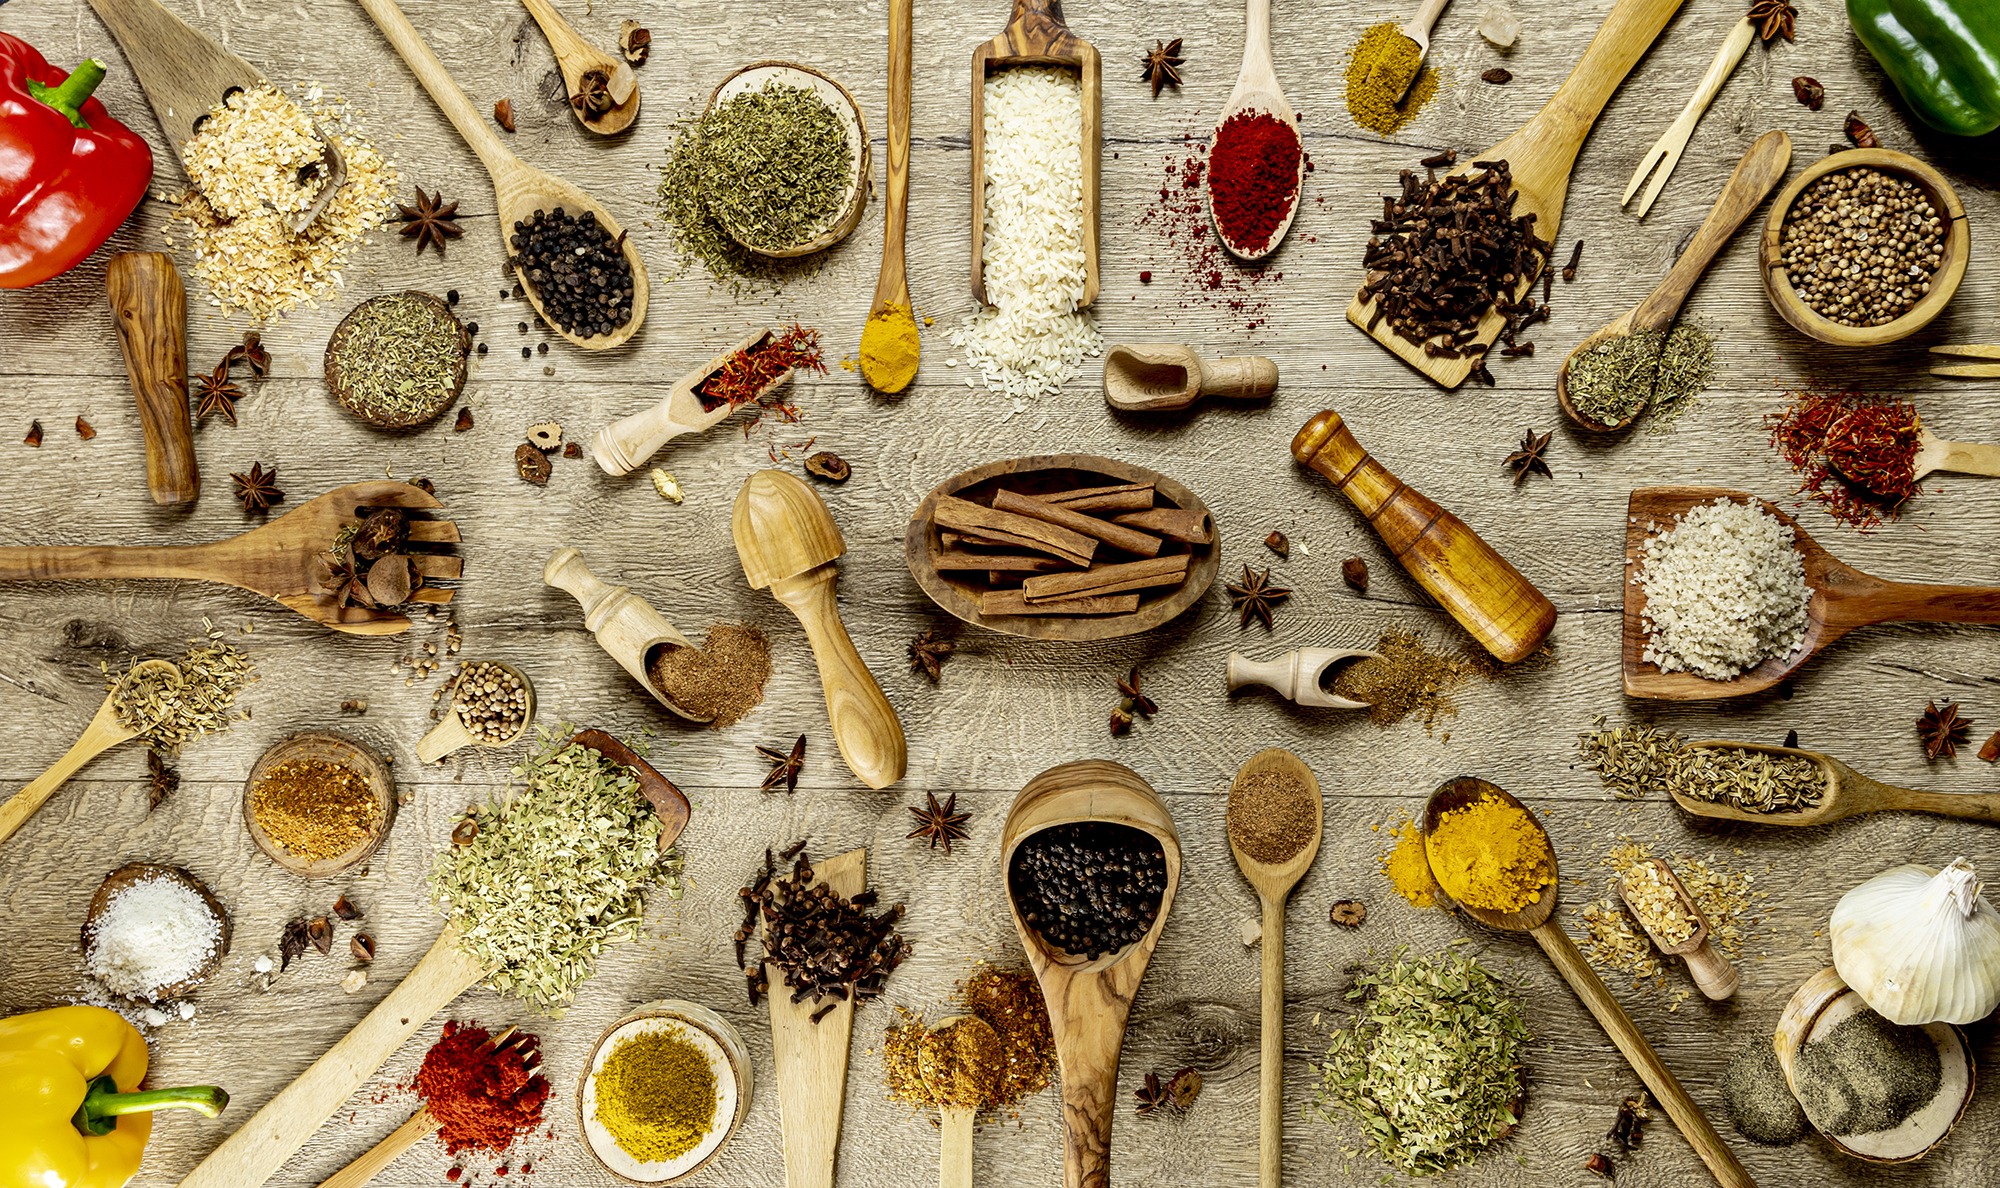 Big set of Indian and orientals spices and herbs with wooden spatulas. On a wooden table. March 2023